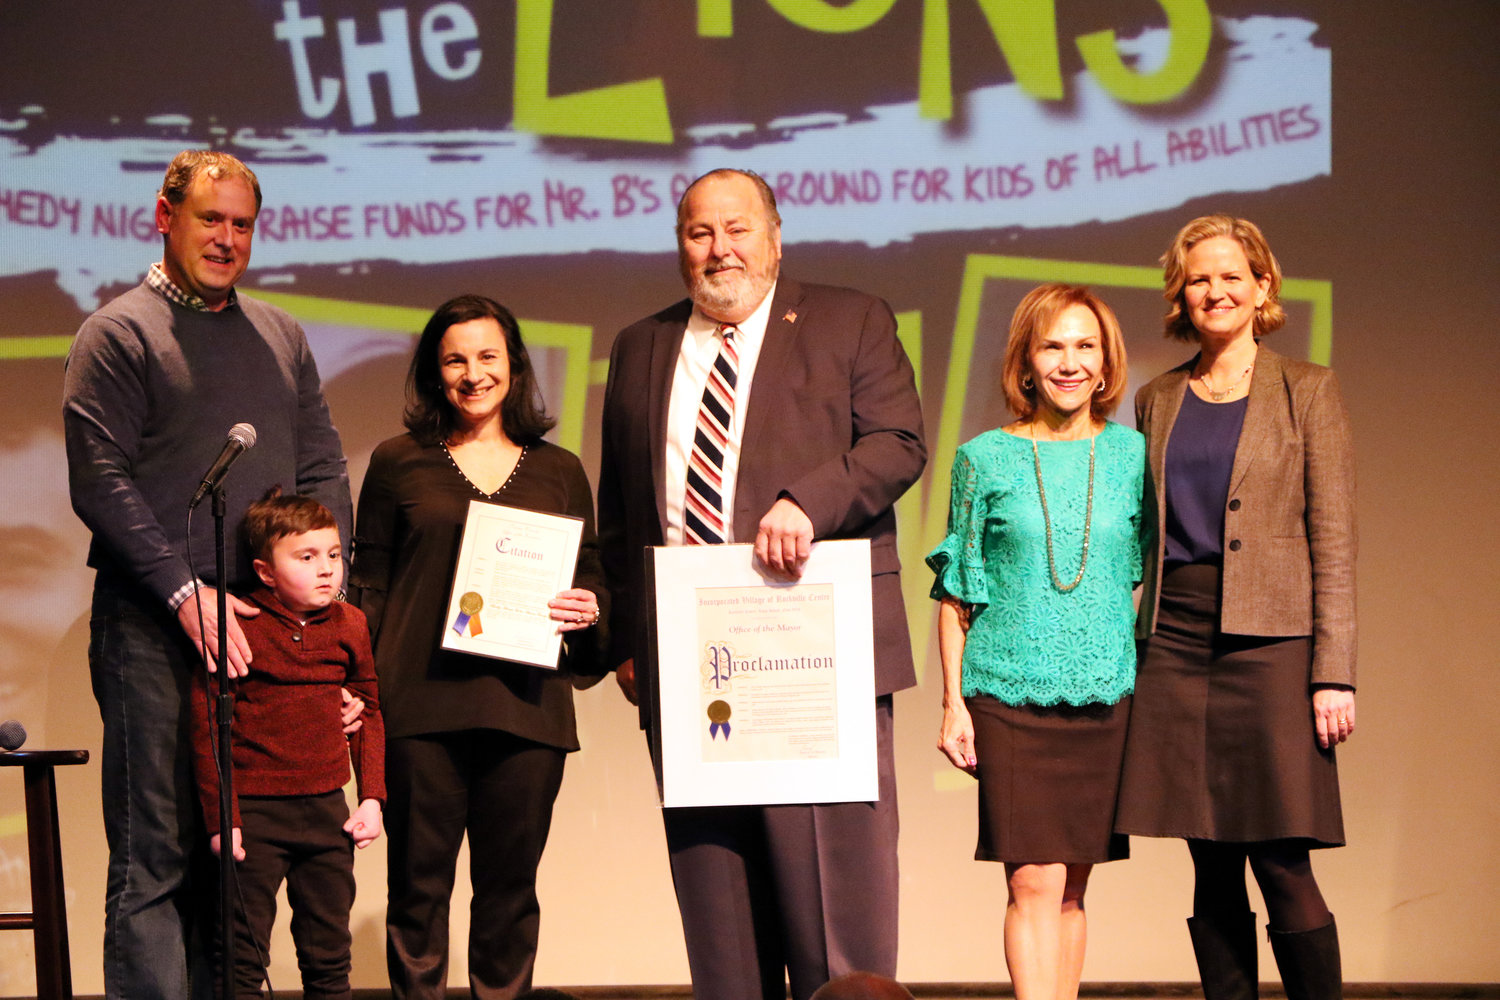 Buddy, with his father, Jonathan, left, and mother, Wendy, were honored by Mayor Francis X. Murray, Lions Club President Joan MacNaughton and Nassau County Executive Laura Curran.